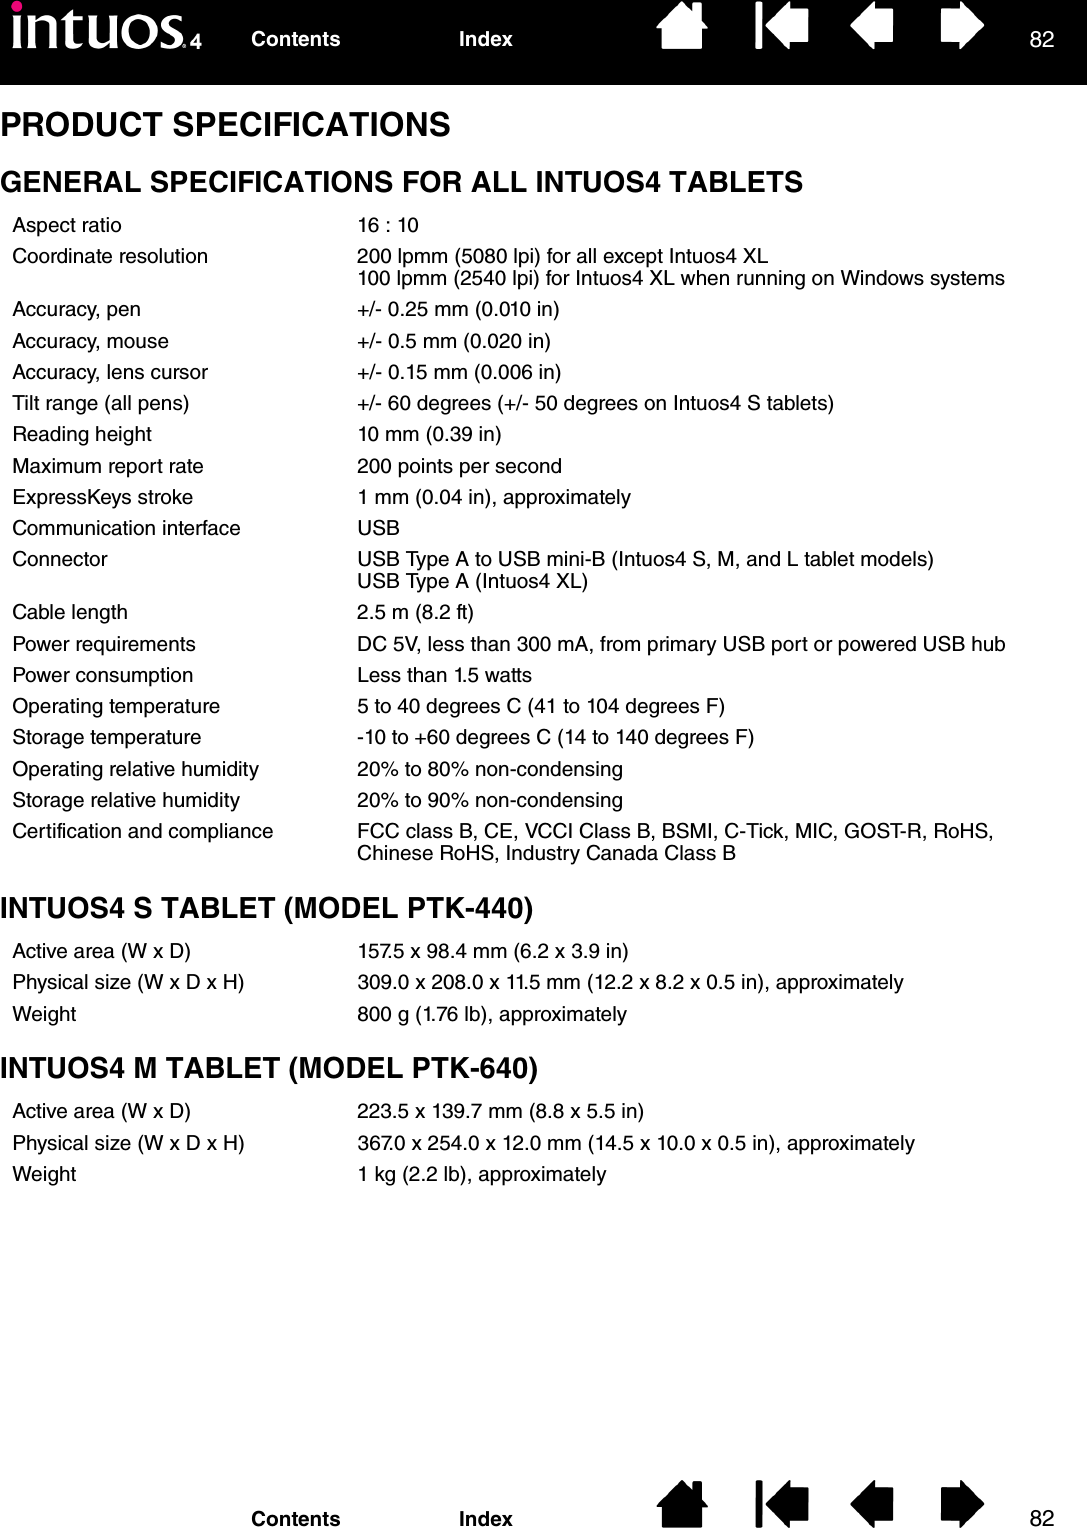 8282IndexContentsIndexContentsPRODUCT SPECIFICATIONSGENERAL SPECIFICATIONS FOR ALL INTUOS4 TABLETSINTUOS4 S TABLET (MODEL PTK-440)INTUOS4 M TABLET (MODEL PTK-640)Aspect ratio 16 : 10Coordinate resolution 200 lpmm (5080 lpi) for all except Intuos4 XL100 lpmm (2540 lpi) for Intuos4 XL when running on Windows systemsAccuracy, pen +/- 0.25 mm (0.010 in)Accuracy, mouse +/- 0.5 mm (0.020 in)Accuracy, lens cursor +/- 0.15 mm (0.006 in)Tilt range (all pens) +/- 60 degrees (+/- 50 degrees on Intuos4 S tablets)Reading height 10 mm (0.39 in)Maximum report rate 200 points per secondExpressKeys stroke 1 mm (0.04 in), approximatelyCommunication interface USBConnector USB Type A to USB mini-B (Intuos4 S, M, and L tablet models)USB Type A (Intuos4 XL)Cable length 2.5 m (8.2 ft)Power requirements DC 5V, less than 300 mA, from primary USB port or powered USB hubPower consumption Less than 1.5 wattsOperating temperature 5 to 40 degrees C (41 to 104 degrees F)Storage temperature -10 to +60 degrees C (14 to 140 degrees F)Operating relative humidity 20% to 80% non-condensingStorage relative humidity 20% to 90% non-condensingCertification and compliance FCC class B, CE, VCCI Class B, BSMI, C-Tick, MIC, GOST-R, RoHS, Chinese RoHS, Industry Canada Class BActive area (W x D) 157.5 x 98.4 mm (6.2 x 3.9 in)Physical size (W x D x H) 309.0 x 208.0 x 11.5 mm (12.2 x 8.2 x 0.5 in), approximatelyWeight 800 g (1.76 lb), approximatelyActive area (W x D) 223.5 x 139.7 mm (8.8 x 5.5 in)Physical size (W x D x H) 367.0 x 254.0 x 12.0 mm (14.5 x 10.0 x 0.5 in), approximatelyWeight 1 kg (2.2 lb), approximately